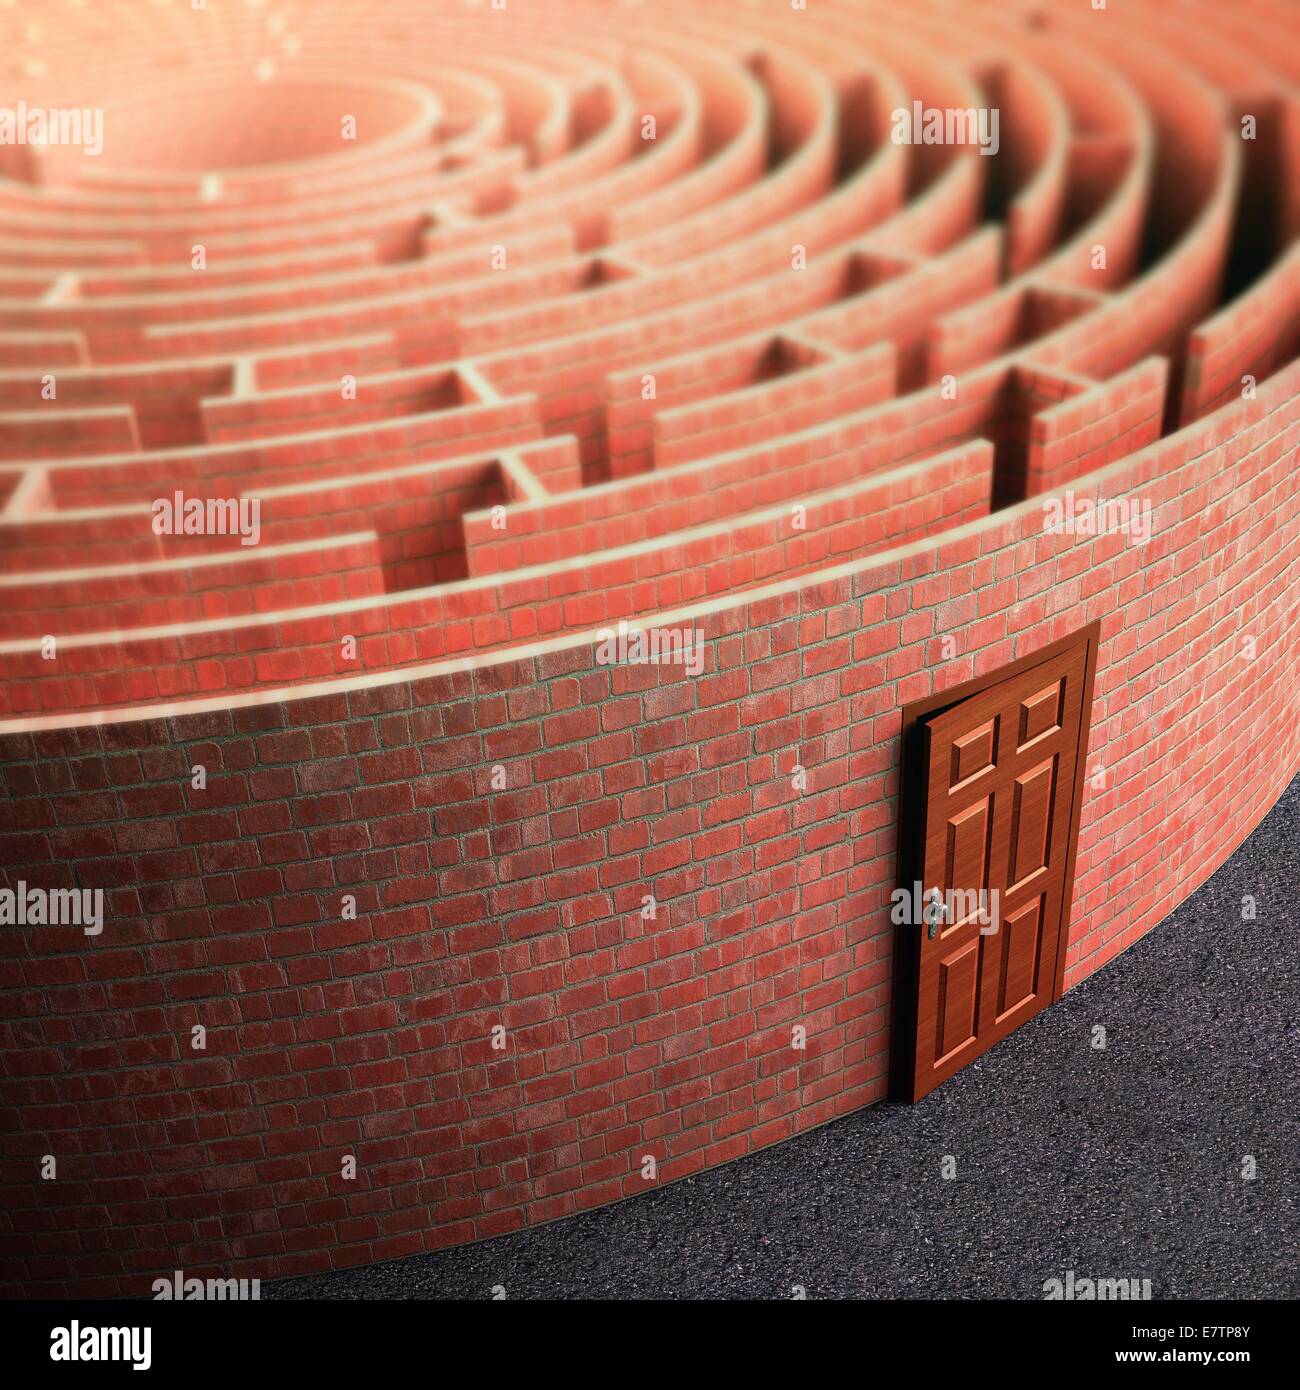 Labyrinth with a door, conceptual artwork. Stock Photo